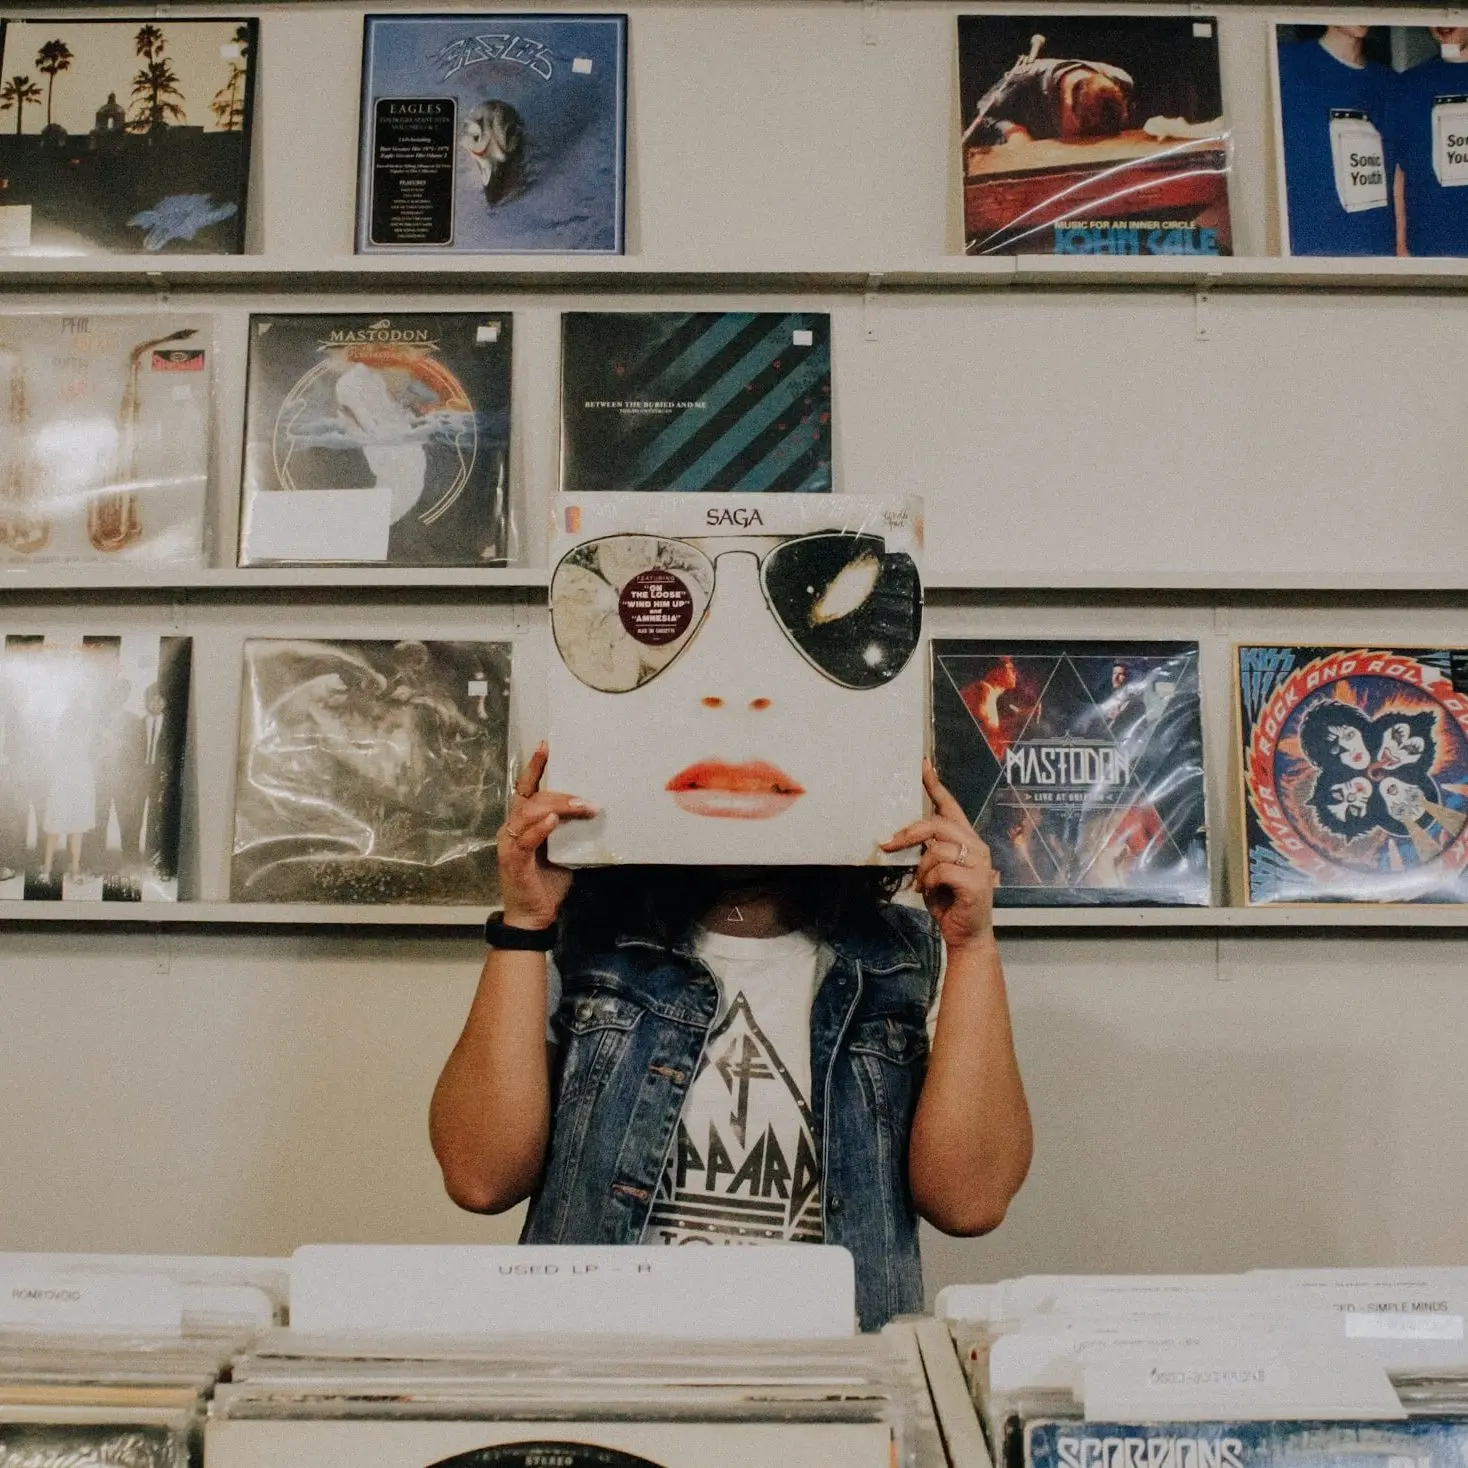 woman holding album cover artwork in front of her face. The artwork has sunglasses a nose and a mouth where hers should be. She is wearin a denim shirt and a white t-shirt with black design on it. there is a wall of vinyl behind her.